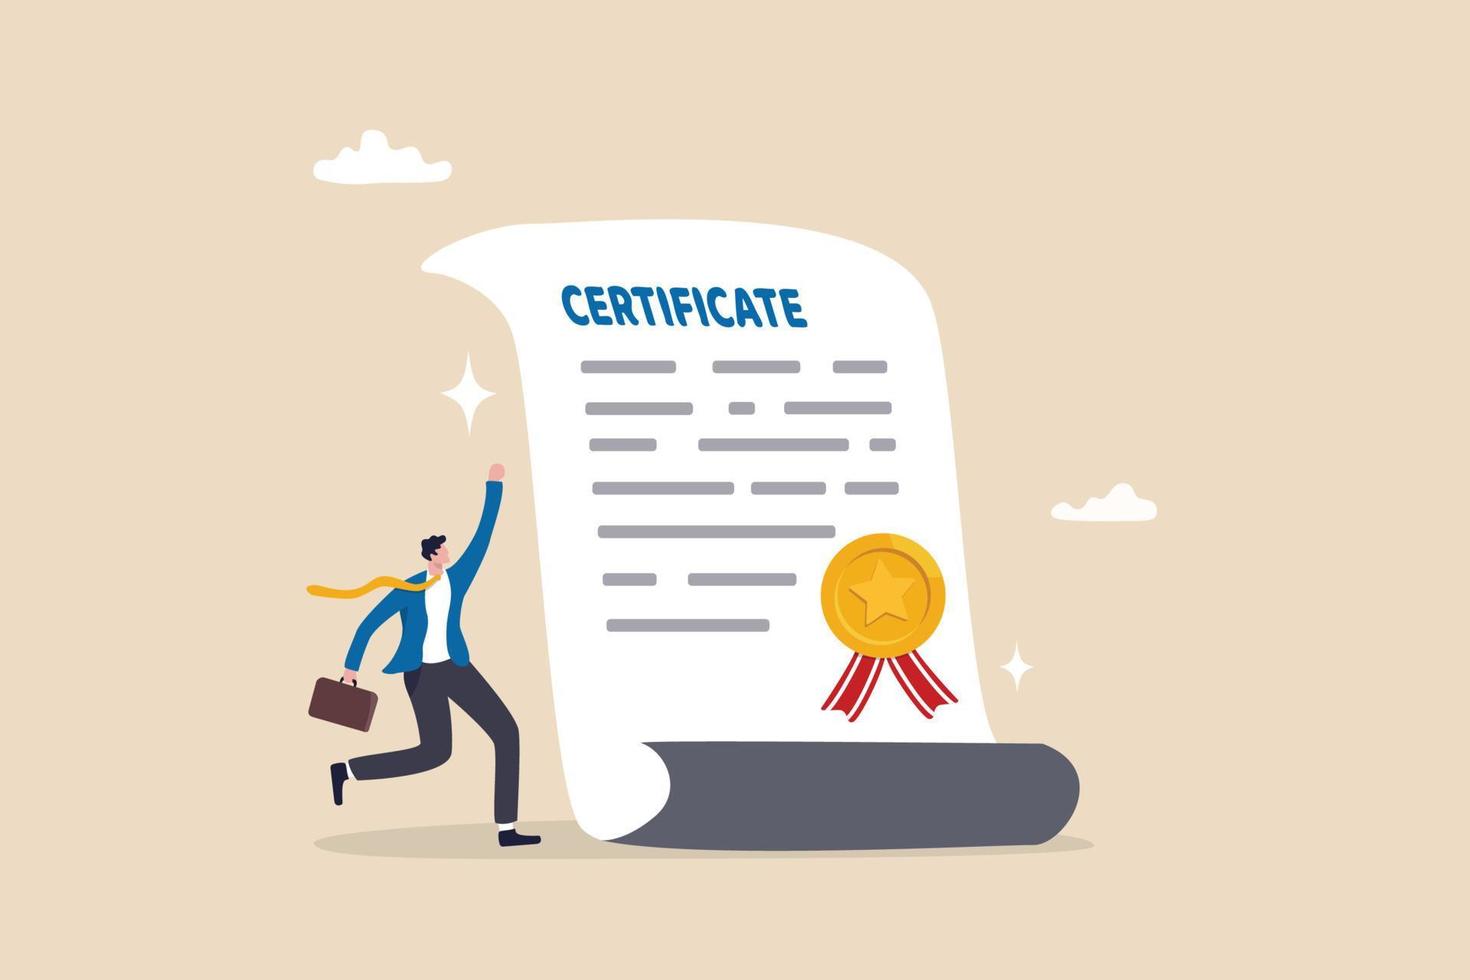 Certificate on taking course, award for excellent work or diploma document, license stamp or education certified guarantee concept, happy businessman with star certificate paper for work achievement. vector